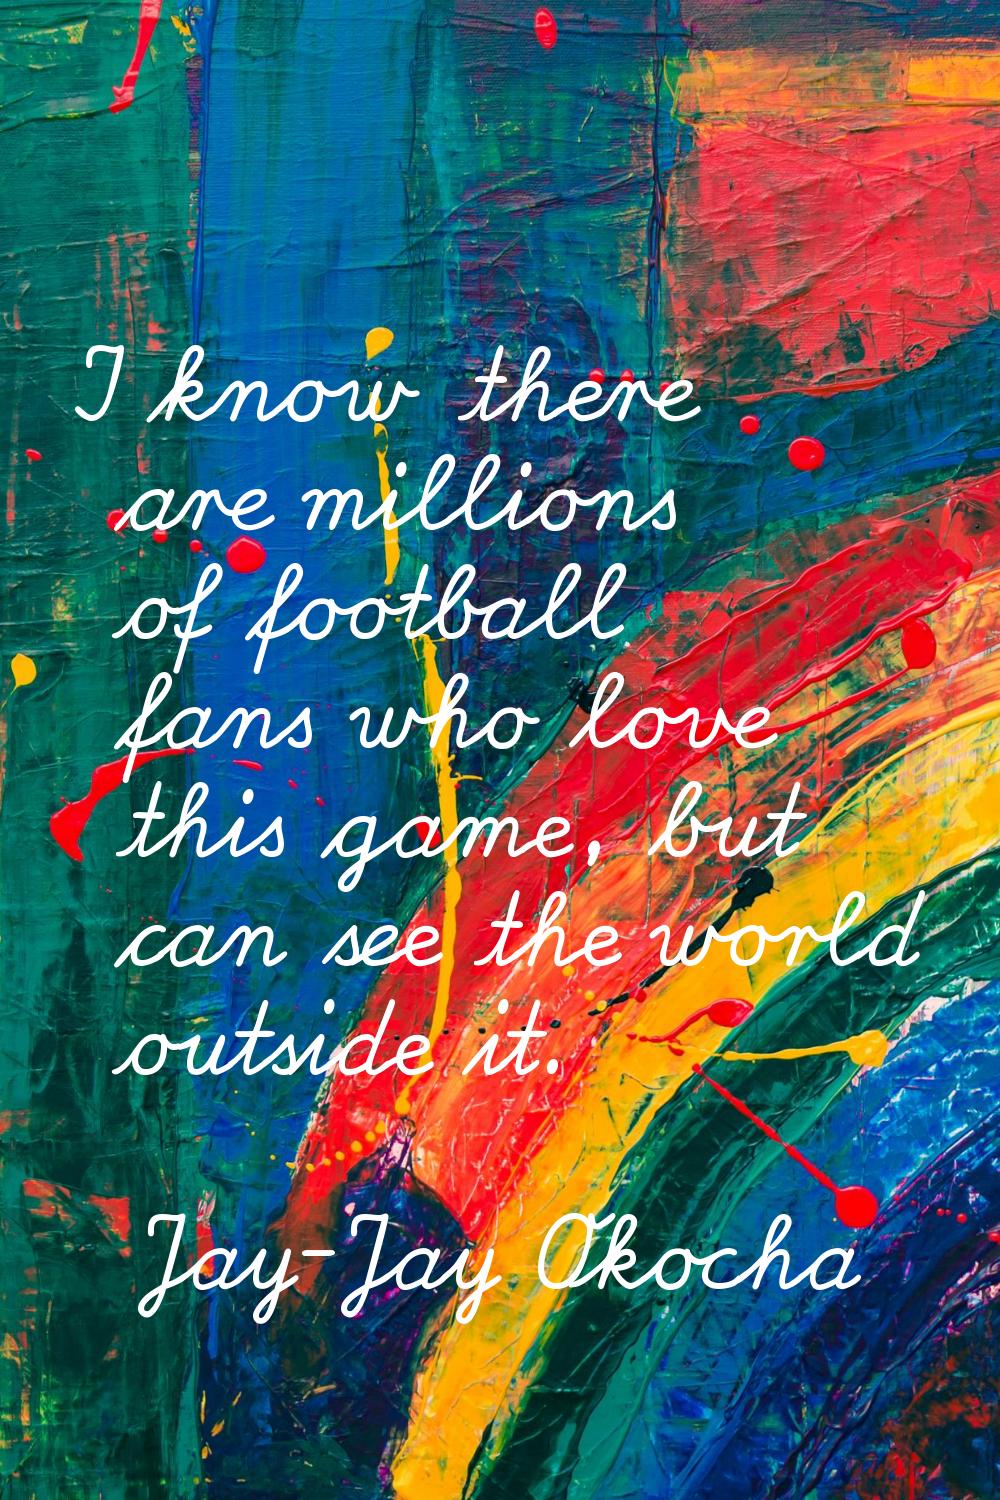 I know there are millions of football fans who love this game, but can see the world outside it.